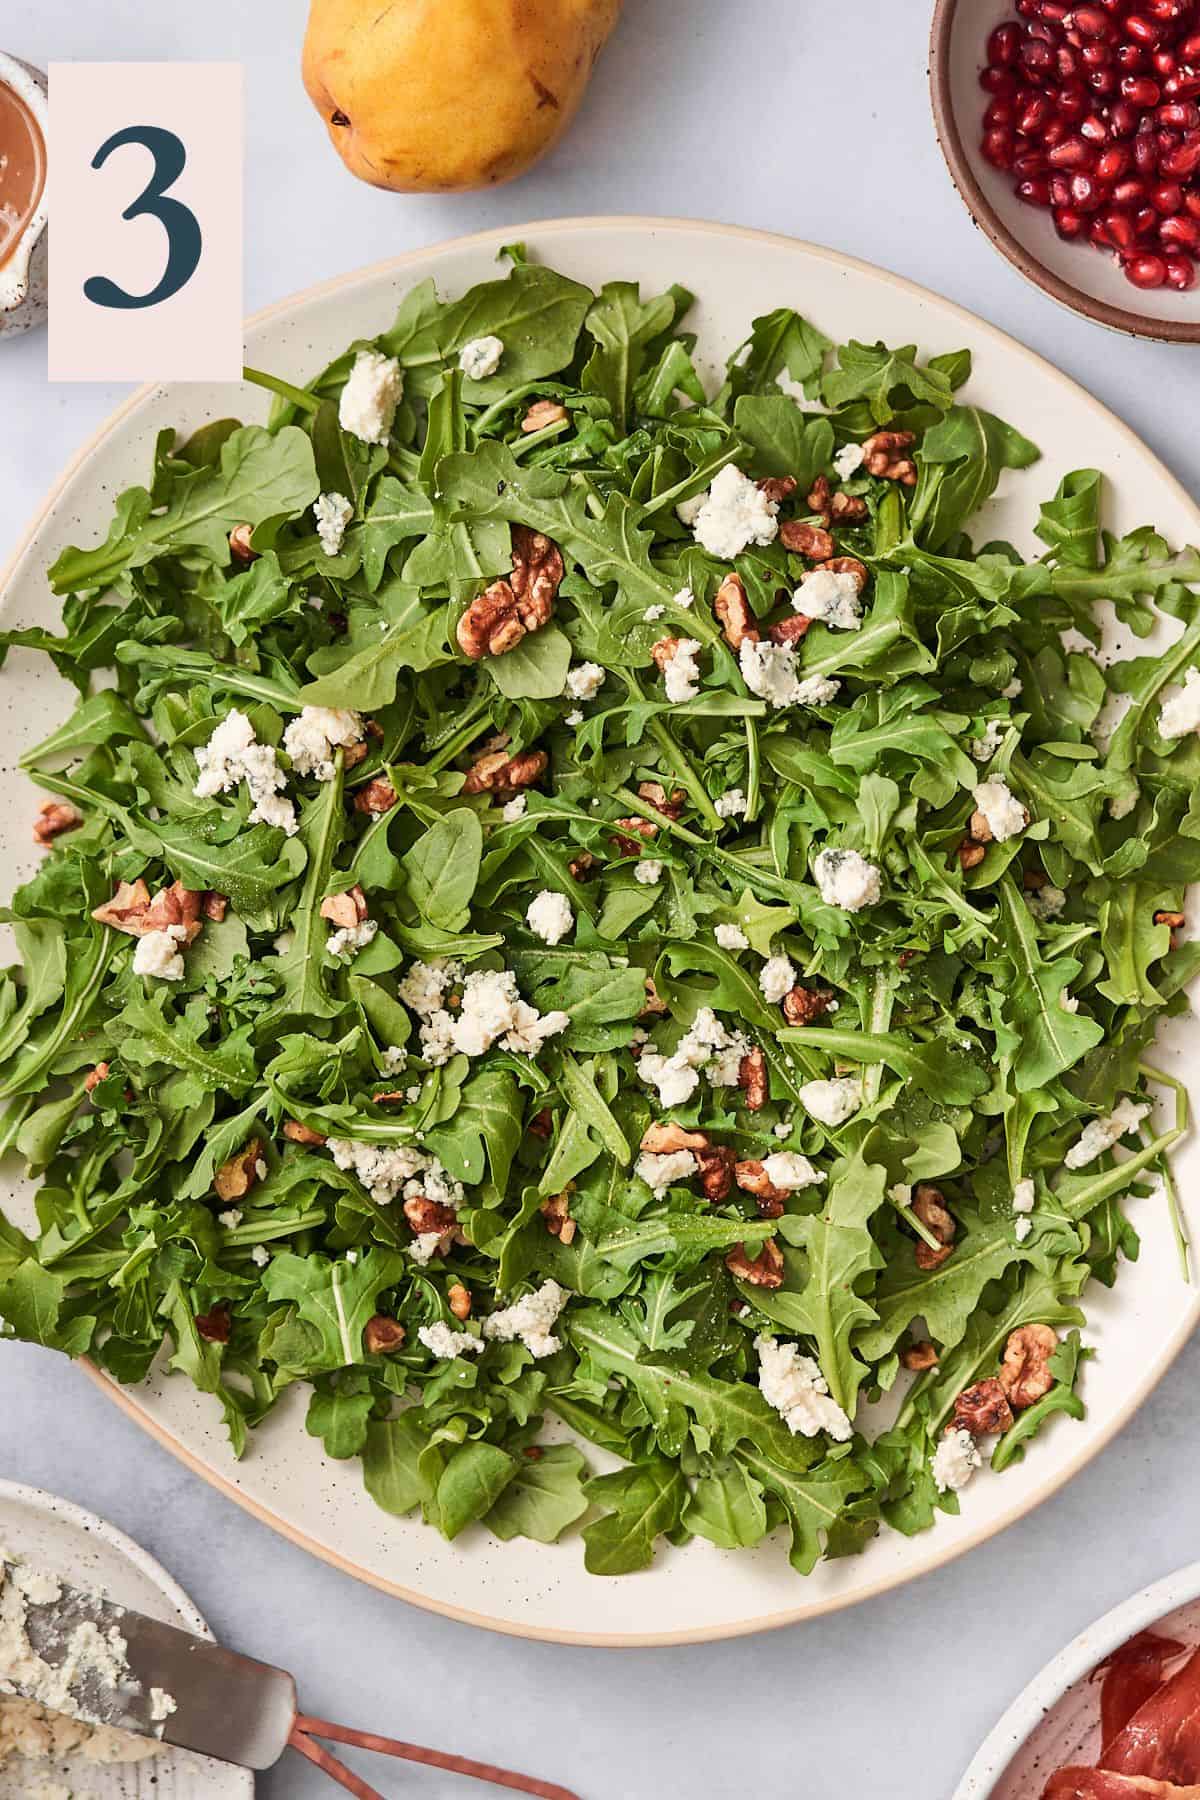 arugula with walnuts, and blue cheese crumbles.